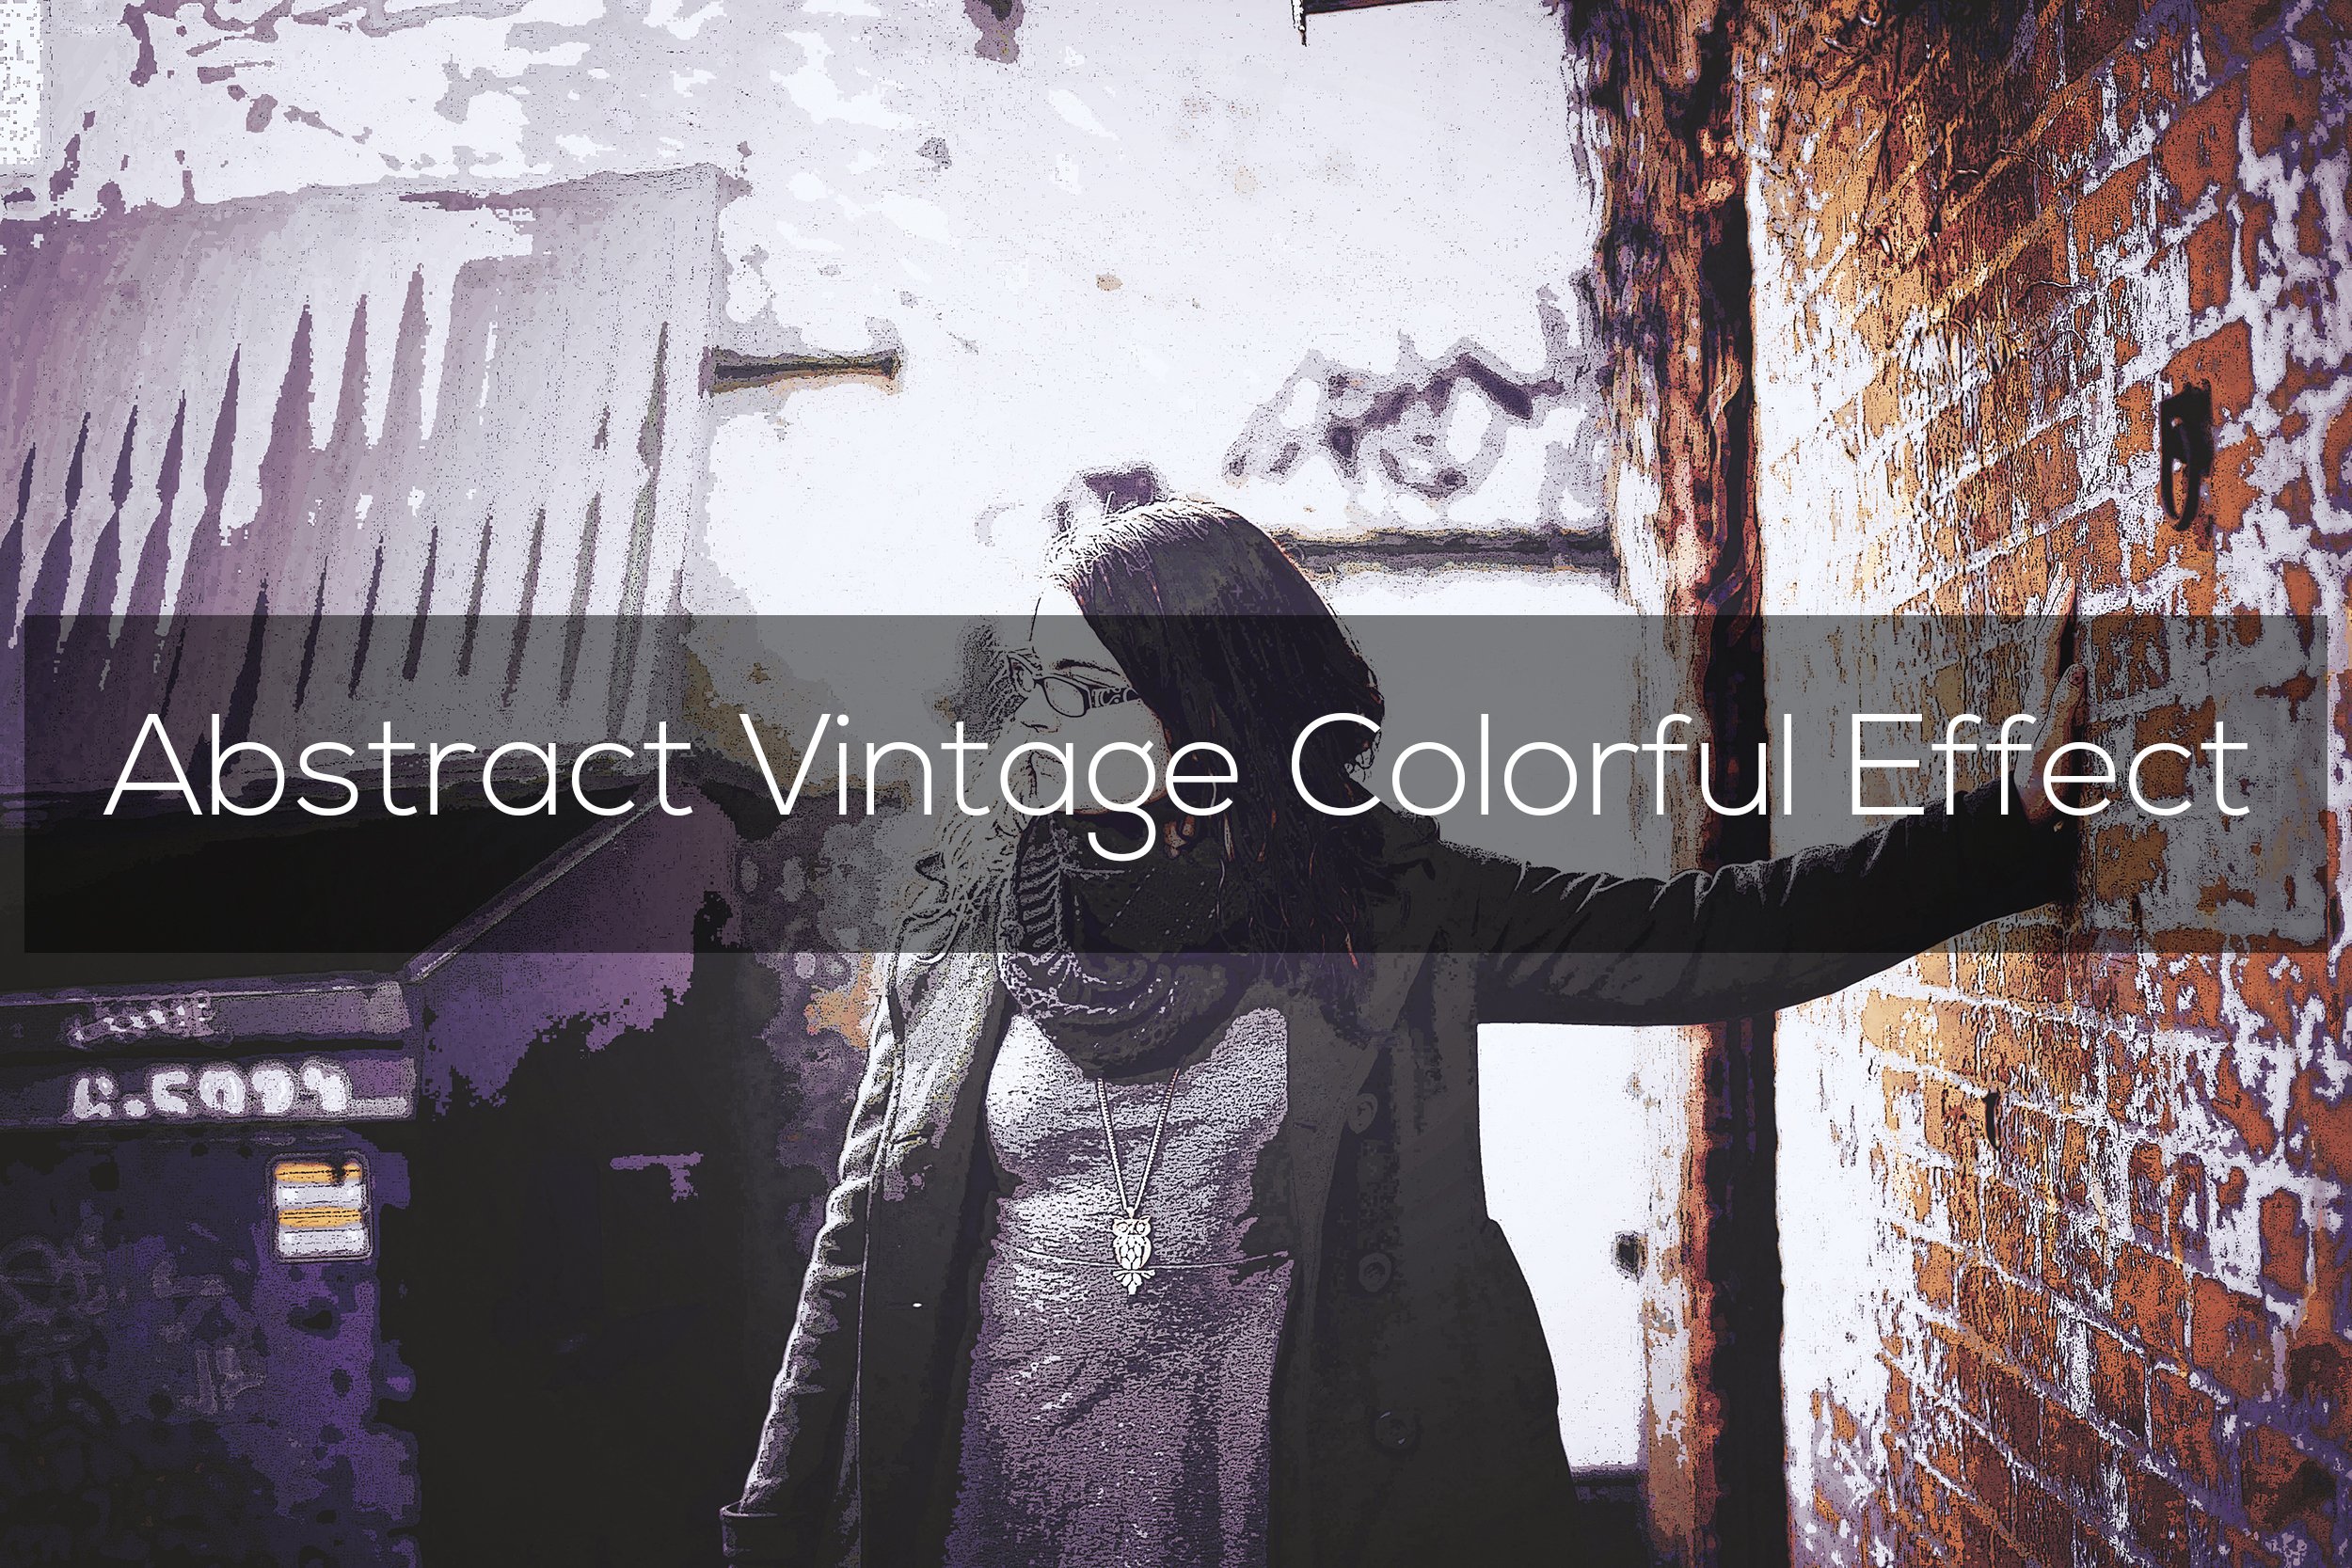 Abstract Vintage Colorful Effectcover image.